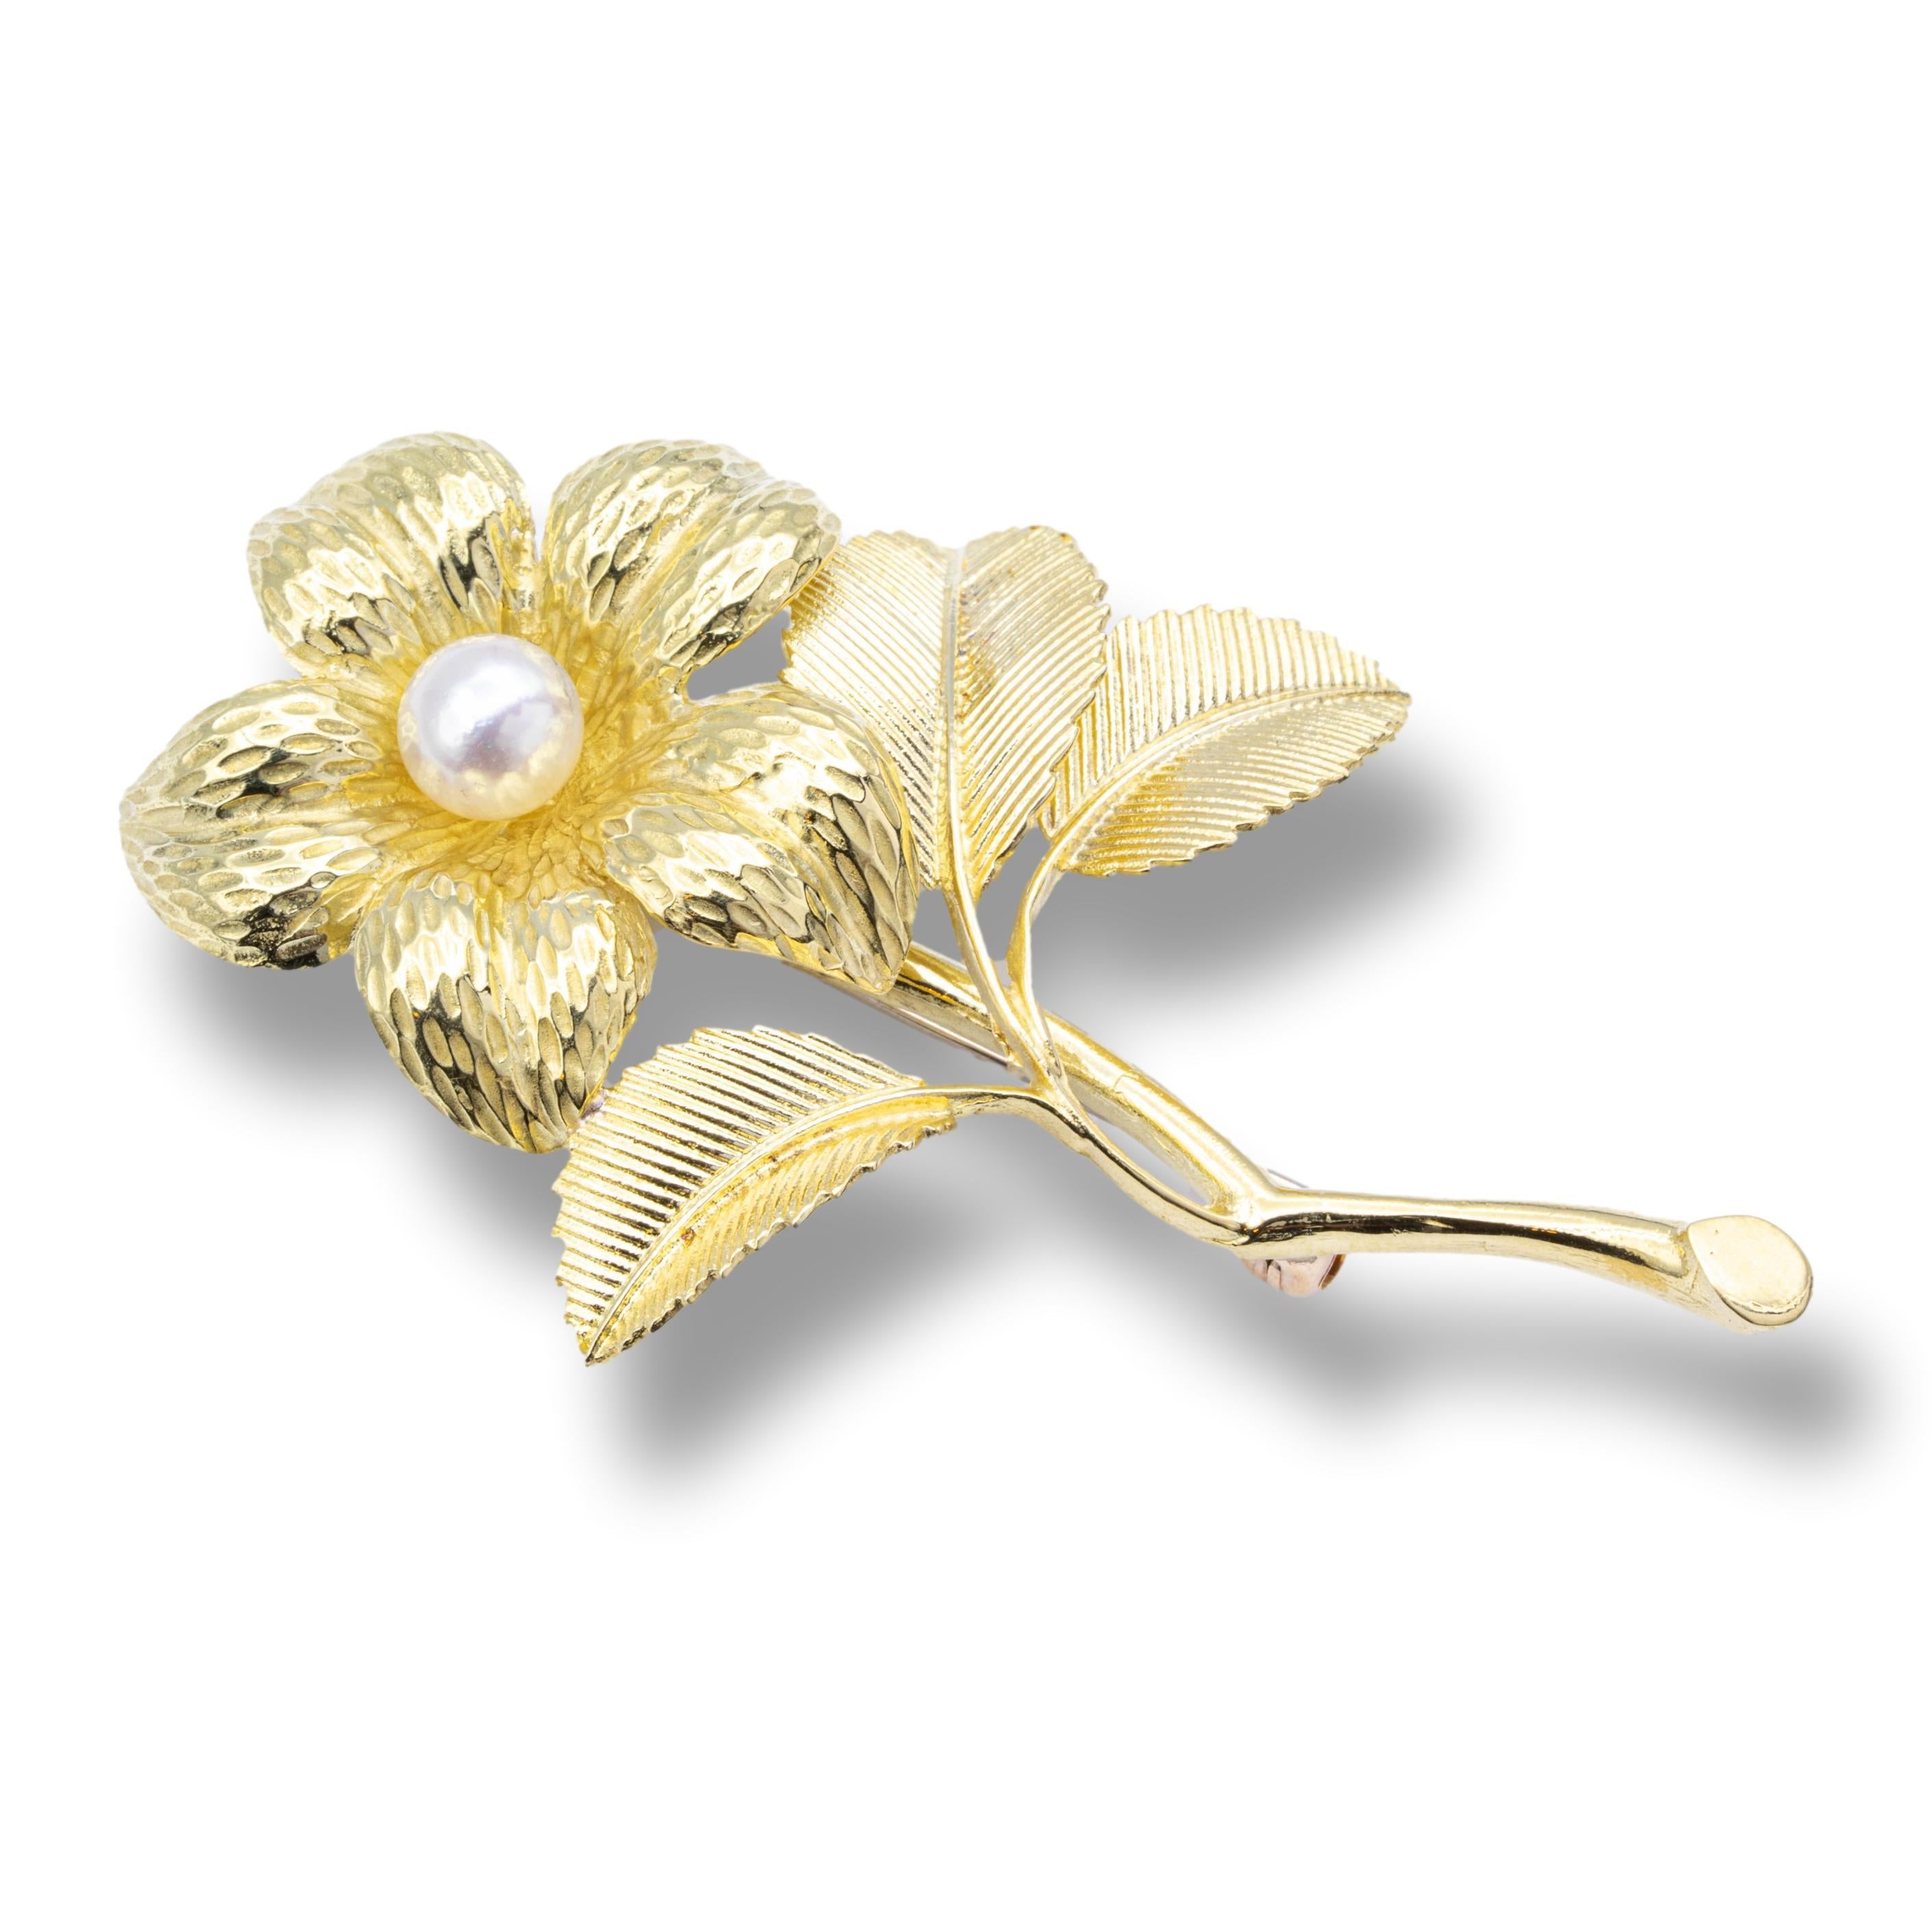 Tiffany & Co. Vintage Flower Brooch finely crafted in Italian 18 karat yellow gold with a 7-7.5mm Freshwater rose pearl , with very nice pinkish hue luster. A combination of detailed patterns include leaves around the pearl with a hammered gold